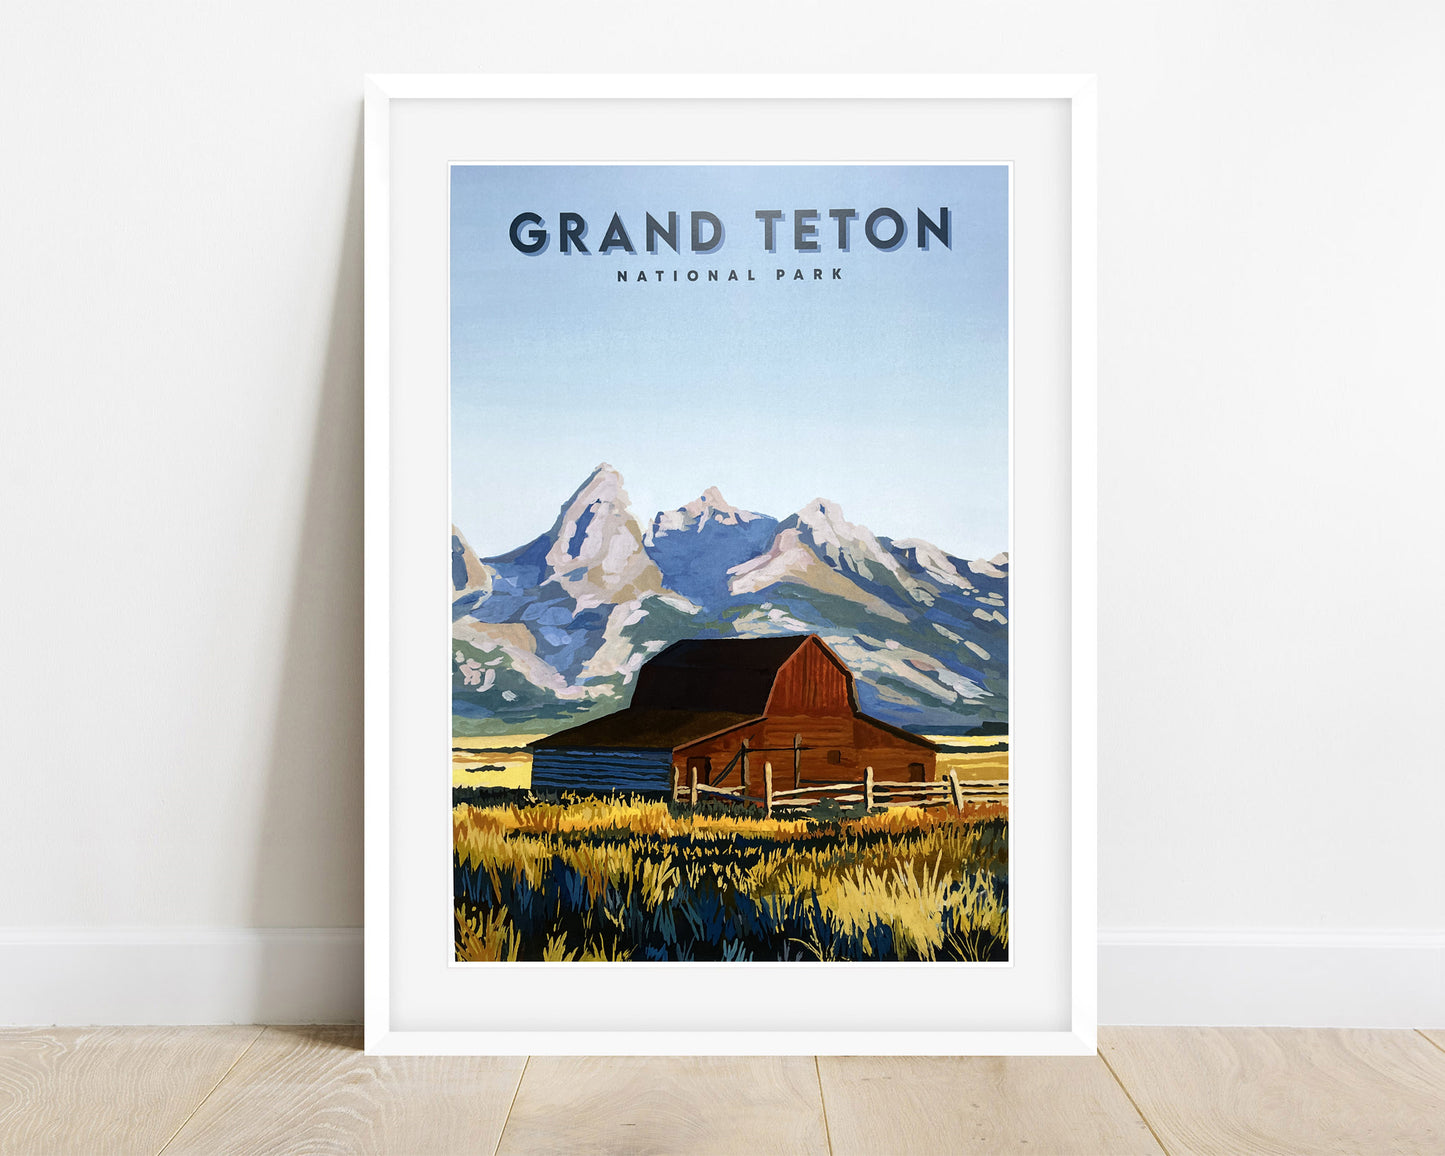 Framed Travel Poster of Grand Teton National Park. Background image of travel poster features landscape painting of T.A. Moulton Barn